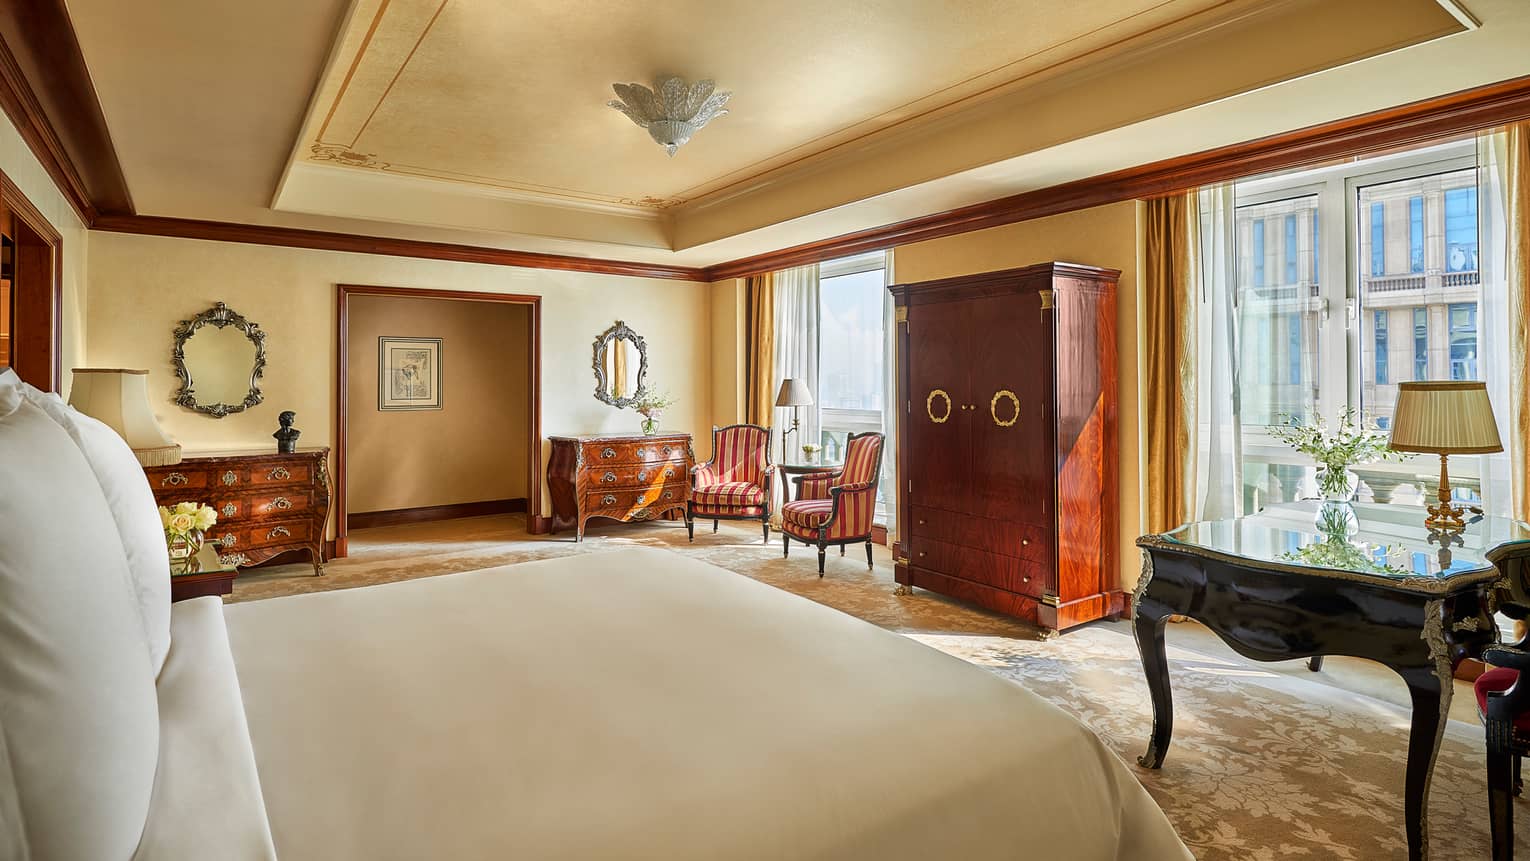 Hotel room bed across from two sunny floor-to-ceiling glass doors, antique-style wood dressers, armchairs 